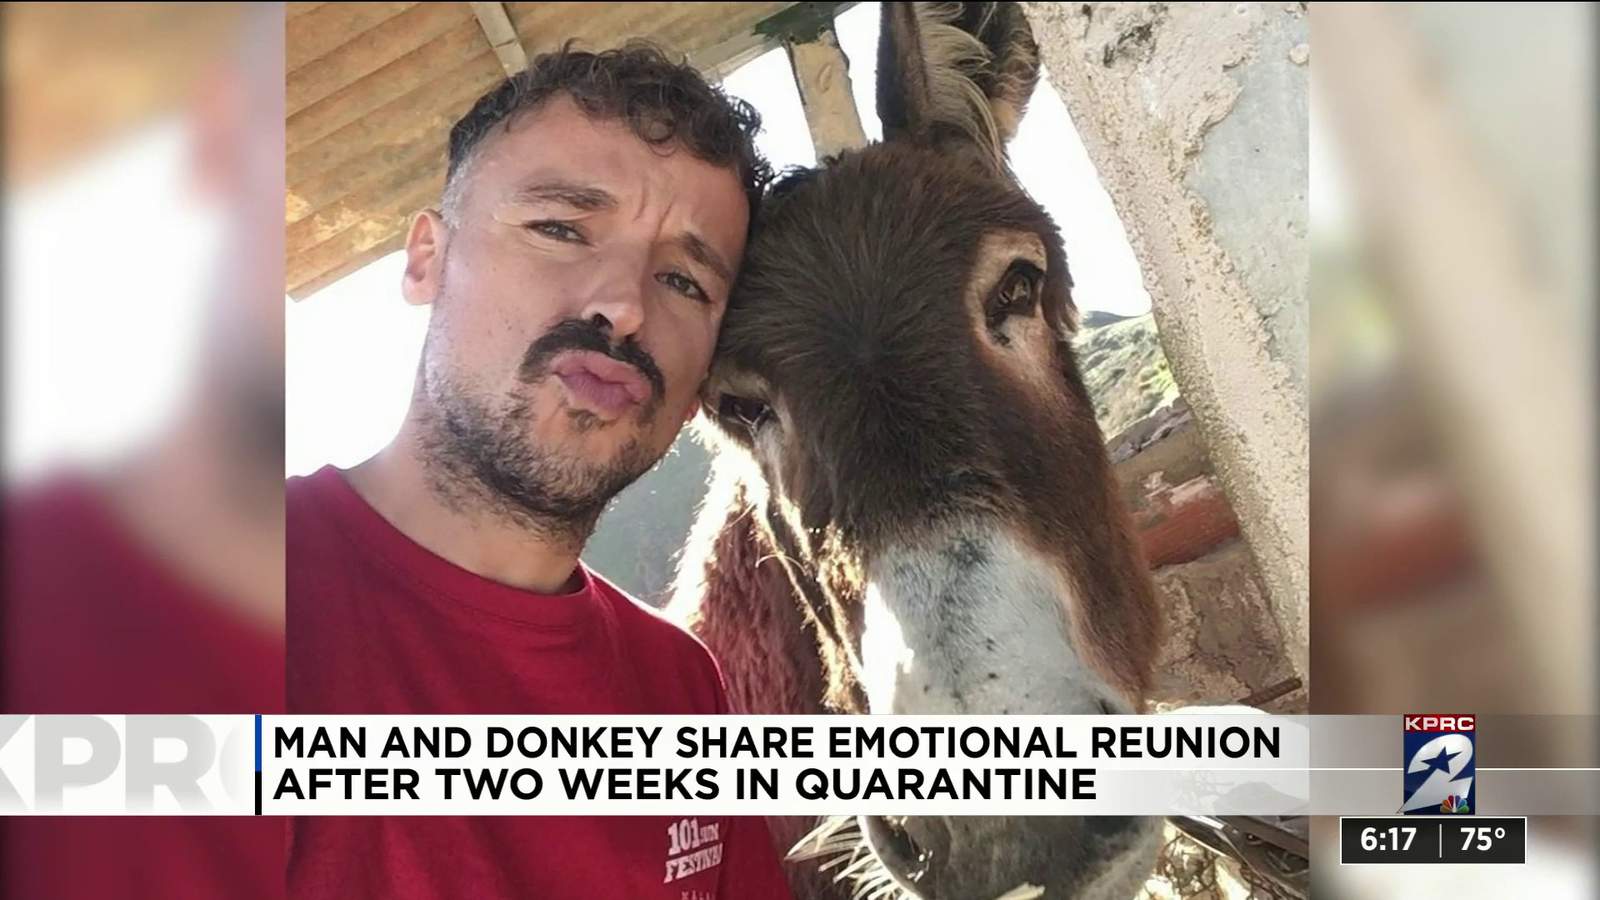 One Good Thing: Man and donkey share emotional reunion after weeks in quarantine